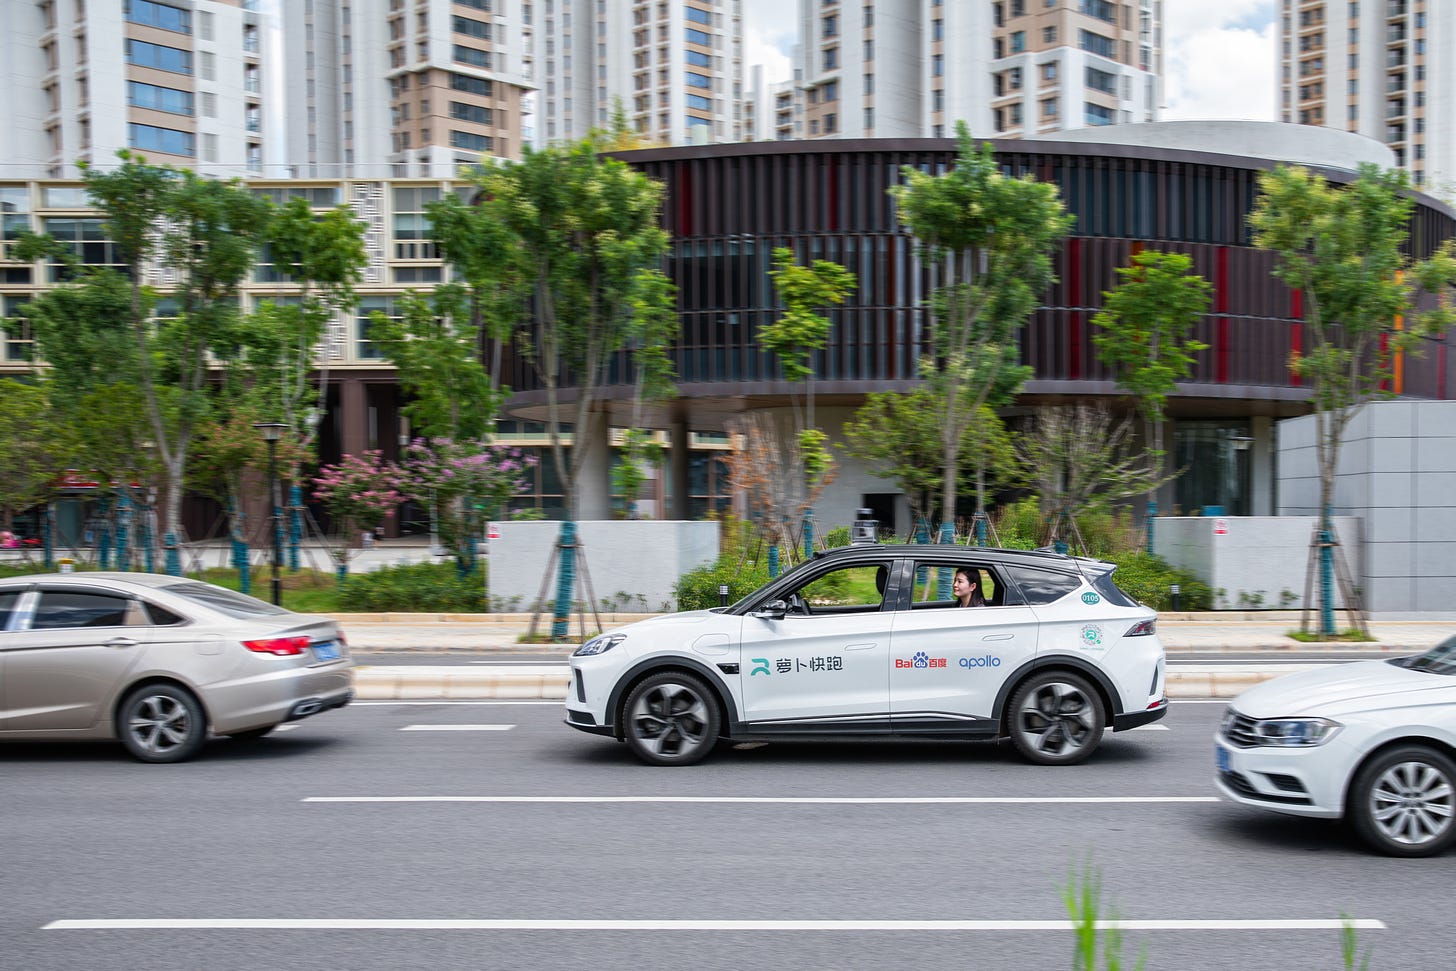 More Than 100 Baidu Robotaxis Now Operating in Wuhan